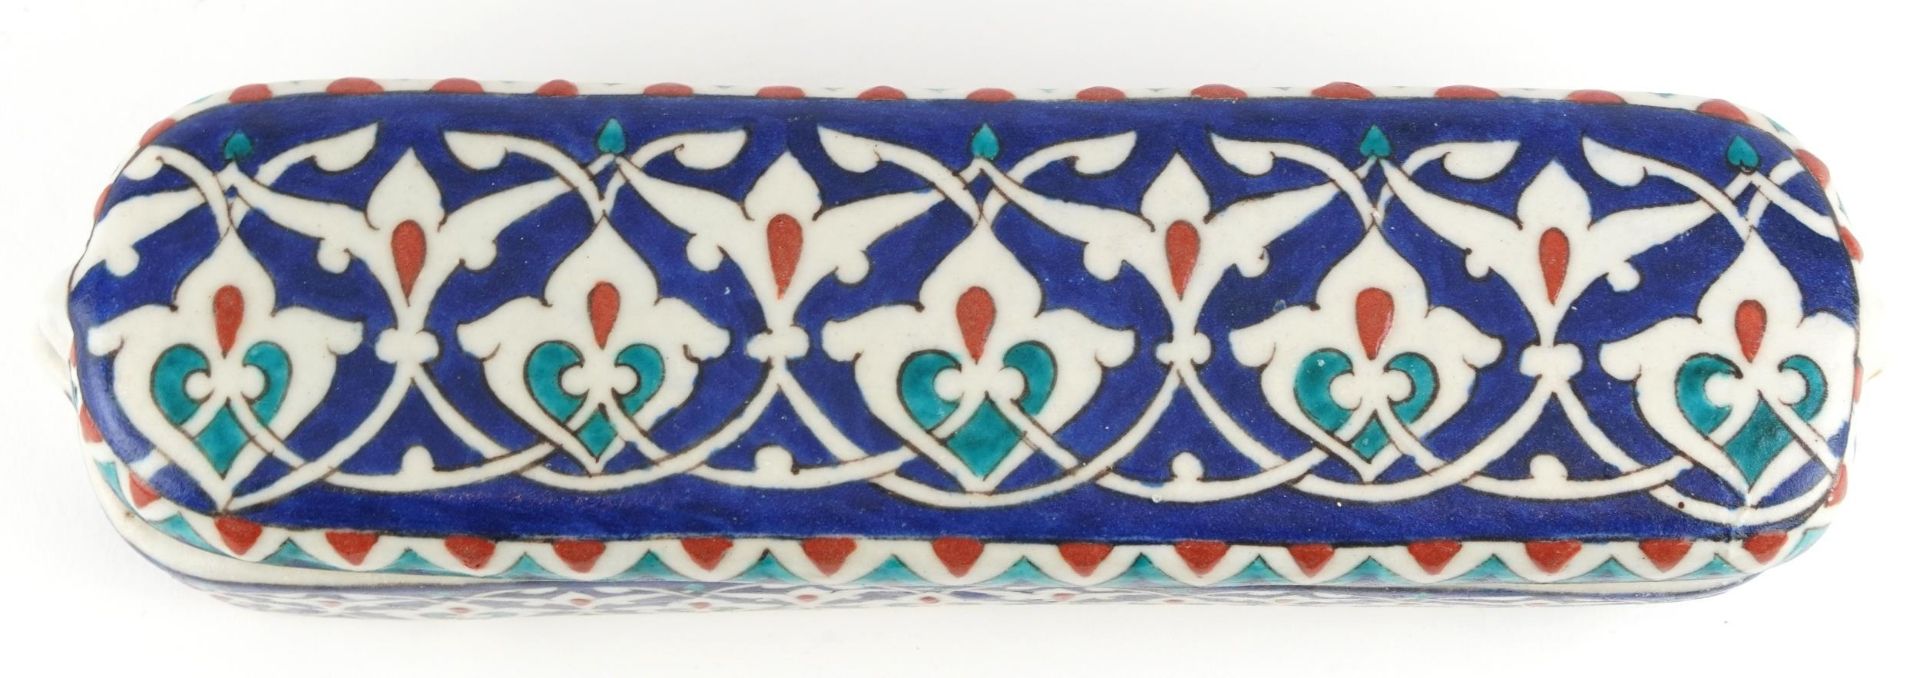 Turkish Iznik pottery pen box and cover, 23.5cm in length - Image 8 of 10